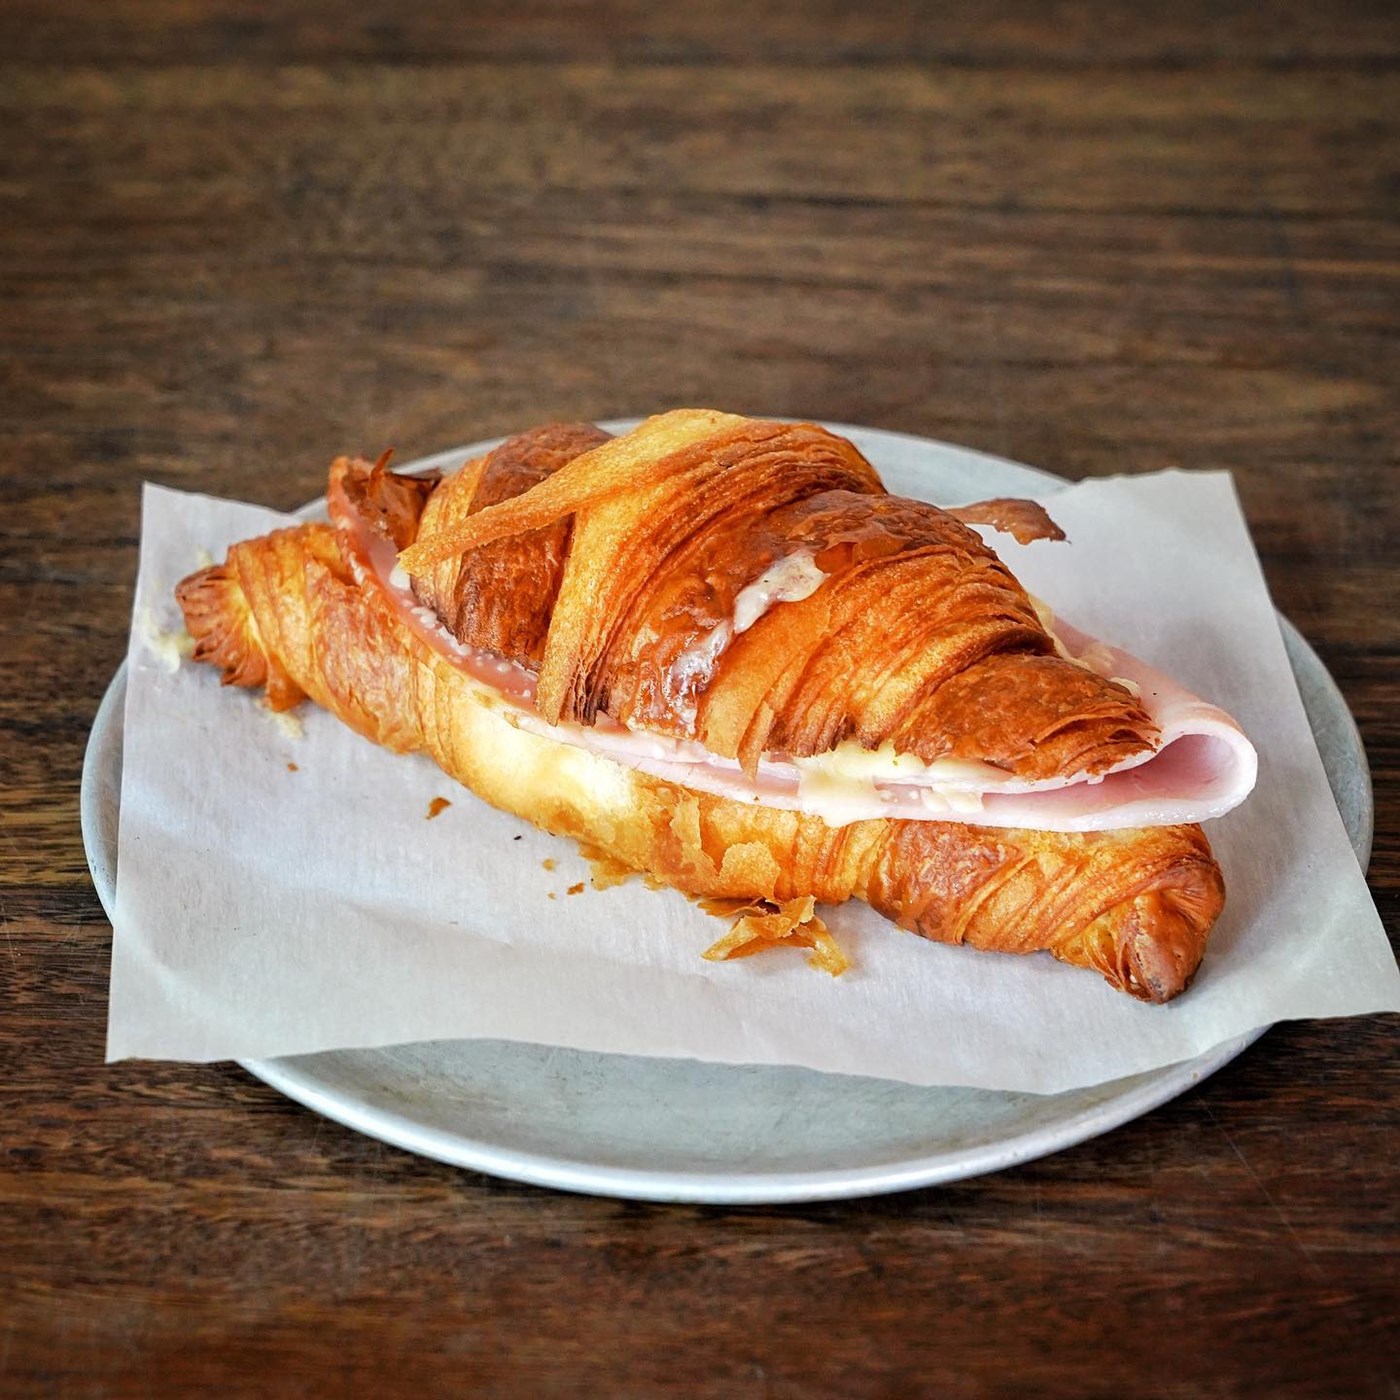 Heavenly Crescents: Where to Find Sydney's Best Croissants | Sitchu Sydney